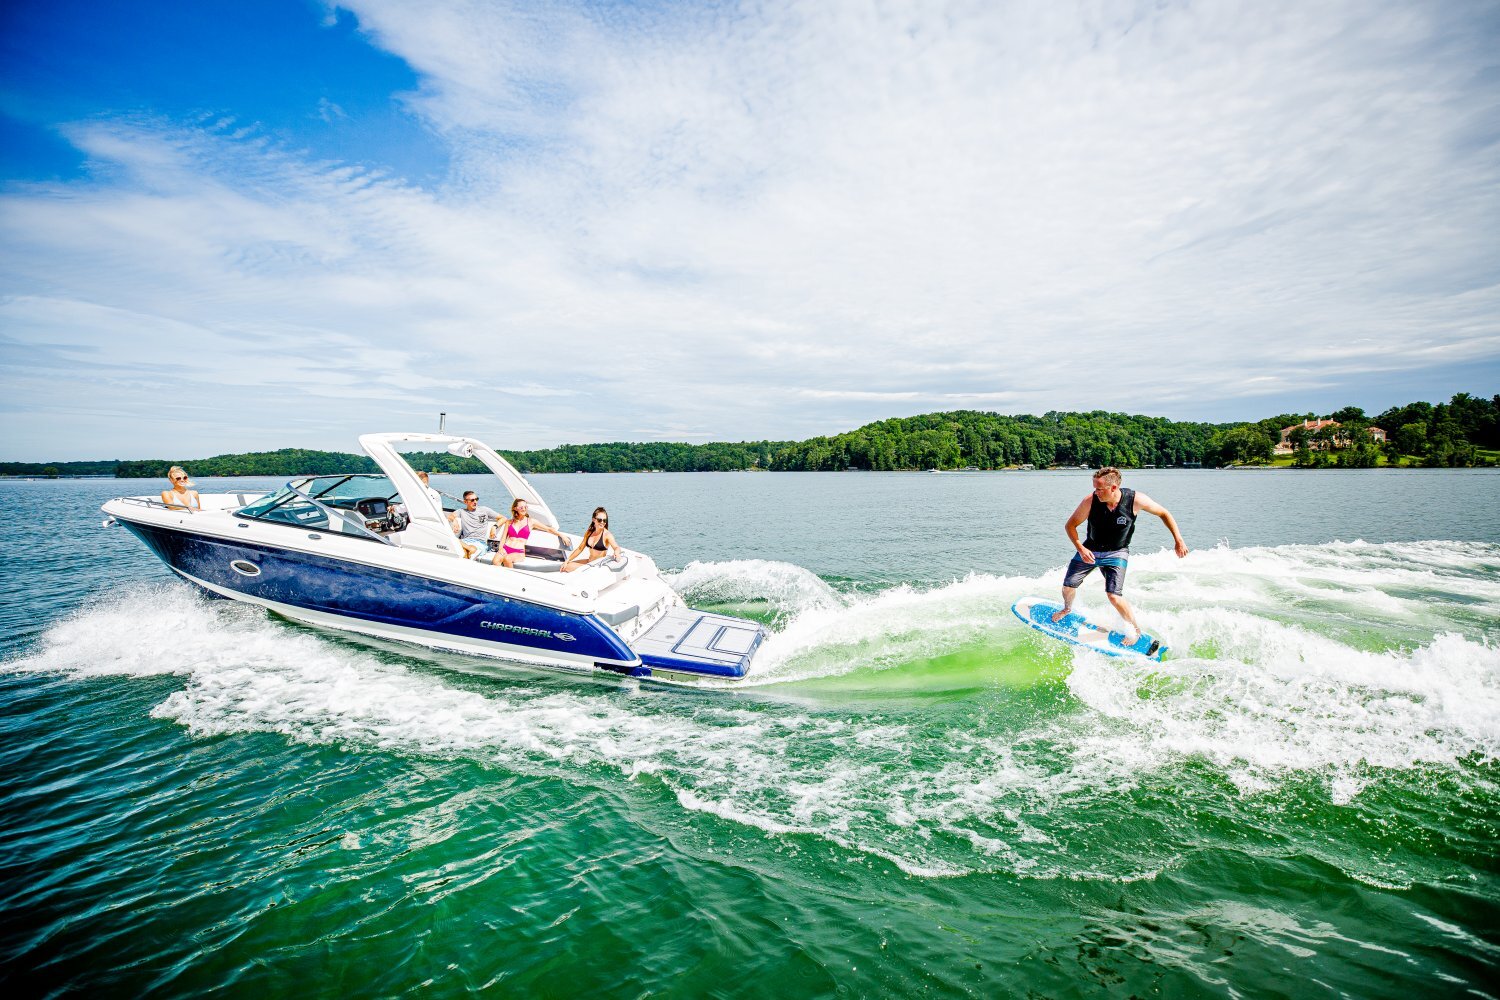 A 2022 Chaparral 30 Surf wake boat